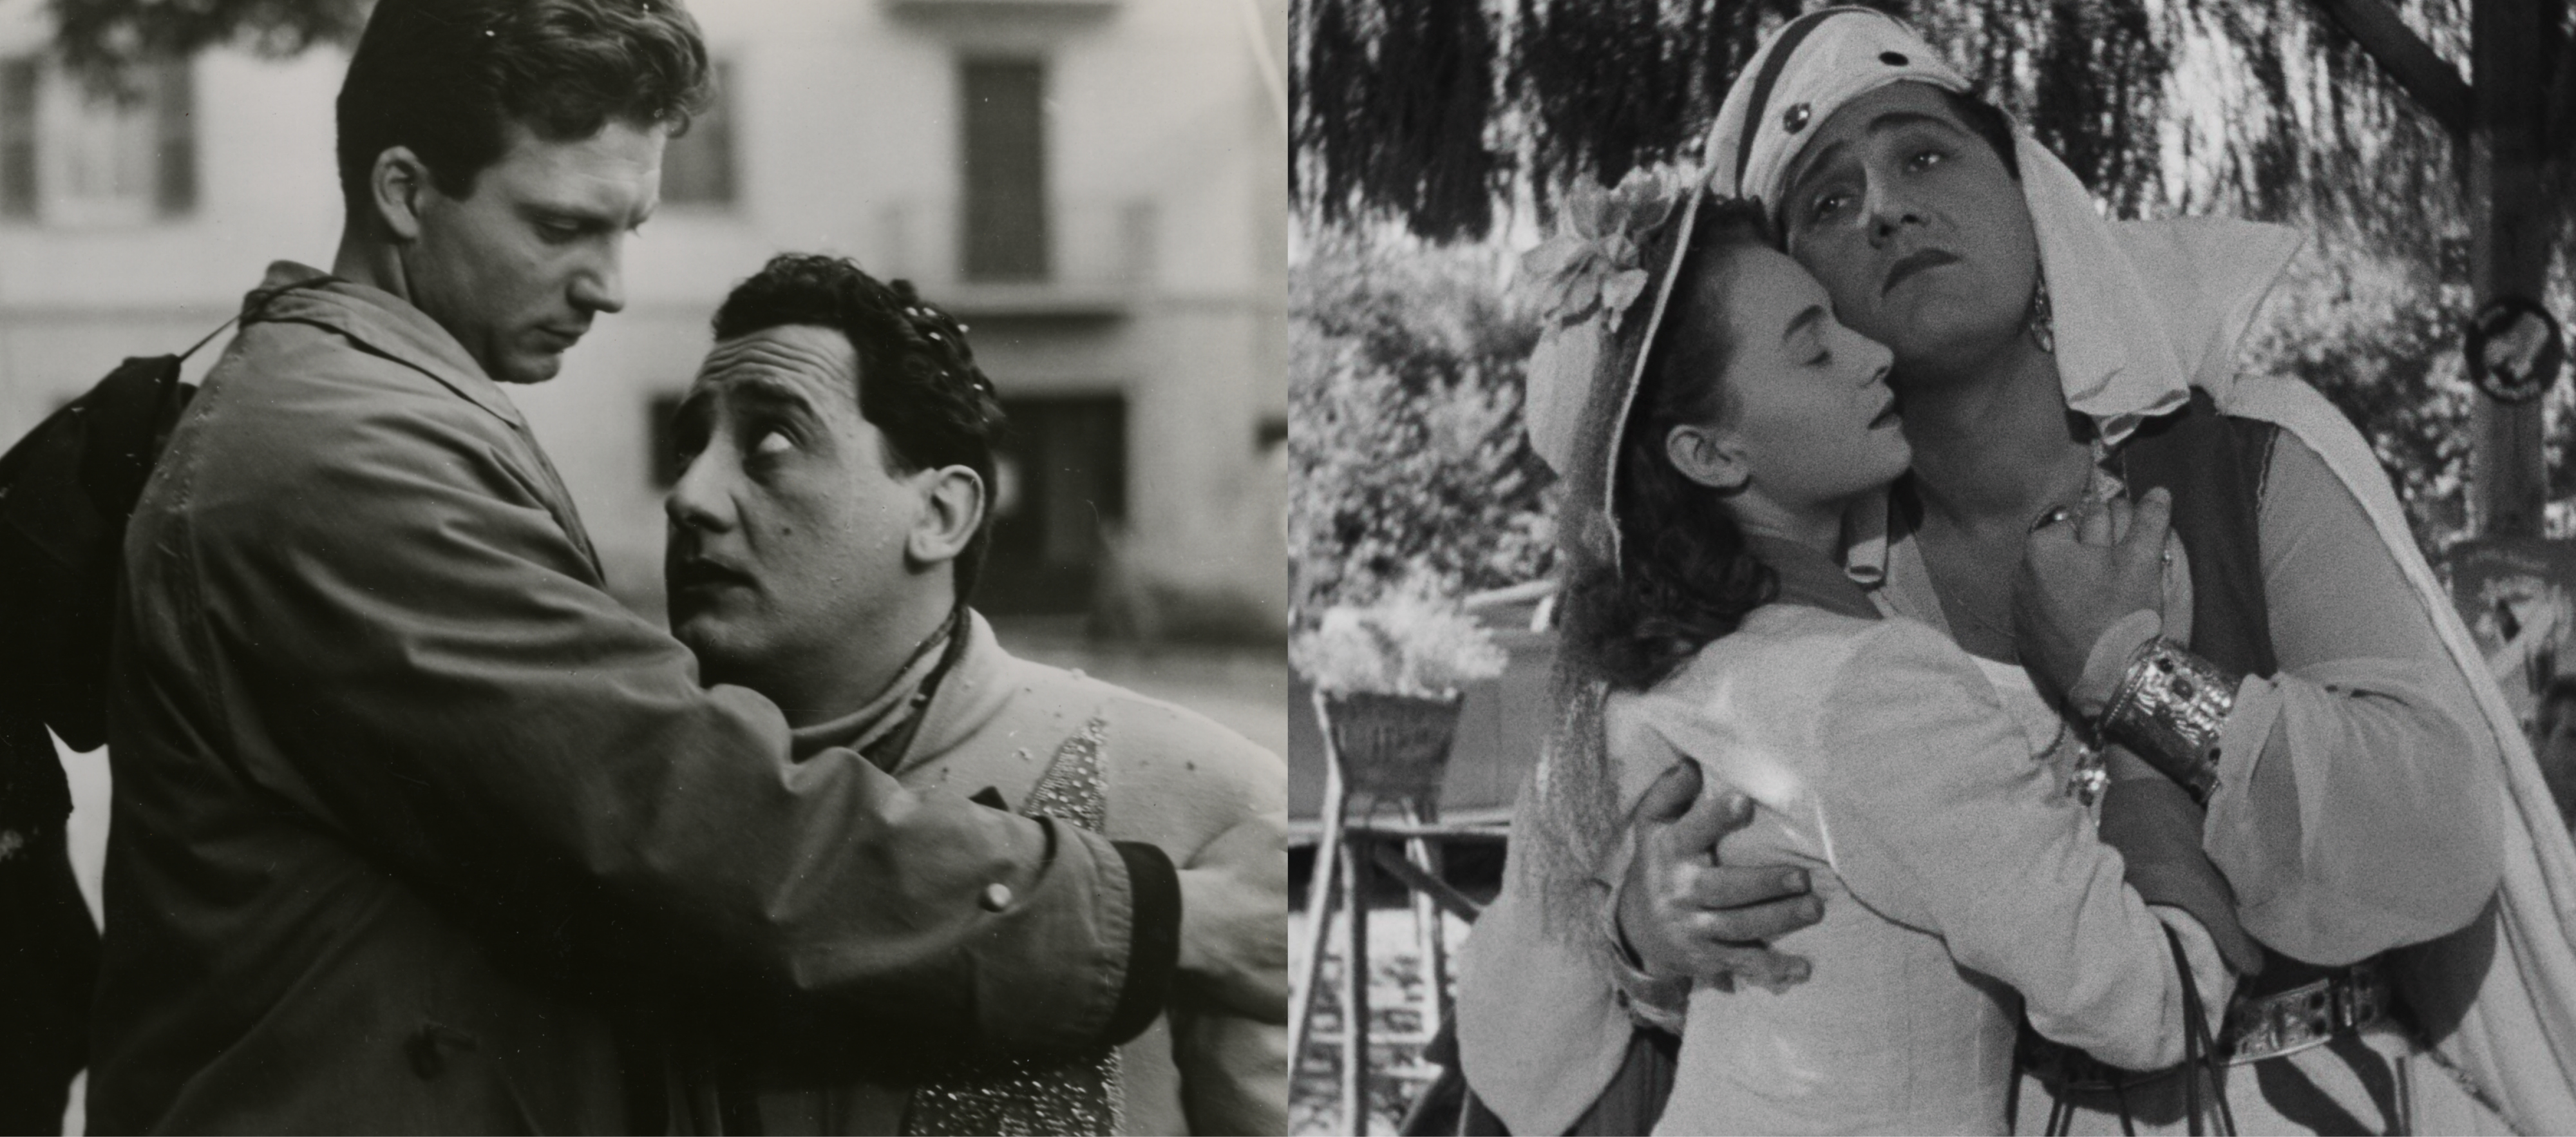 From left to right: Black-and-white still from I vitelloni, featuring Fausto (Franco Fabrizi), Alberto (Alberto Sordi), and Gisella (Vira Silenti). Fausto (left) is looking down at Alberto, his hand on Alberto’s shoulder as if to console him. Gisella is standing in the background watching them; Black-and-white still from The White Sheik featuring Wanda (Brunella Bovo) and Fernando (Alberto Sordin) embracing. Wanda (left) is wearing a dress and hat, and Fernando (right) is wearing a Sheik headdress.